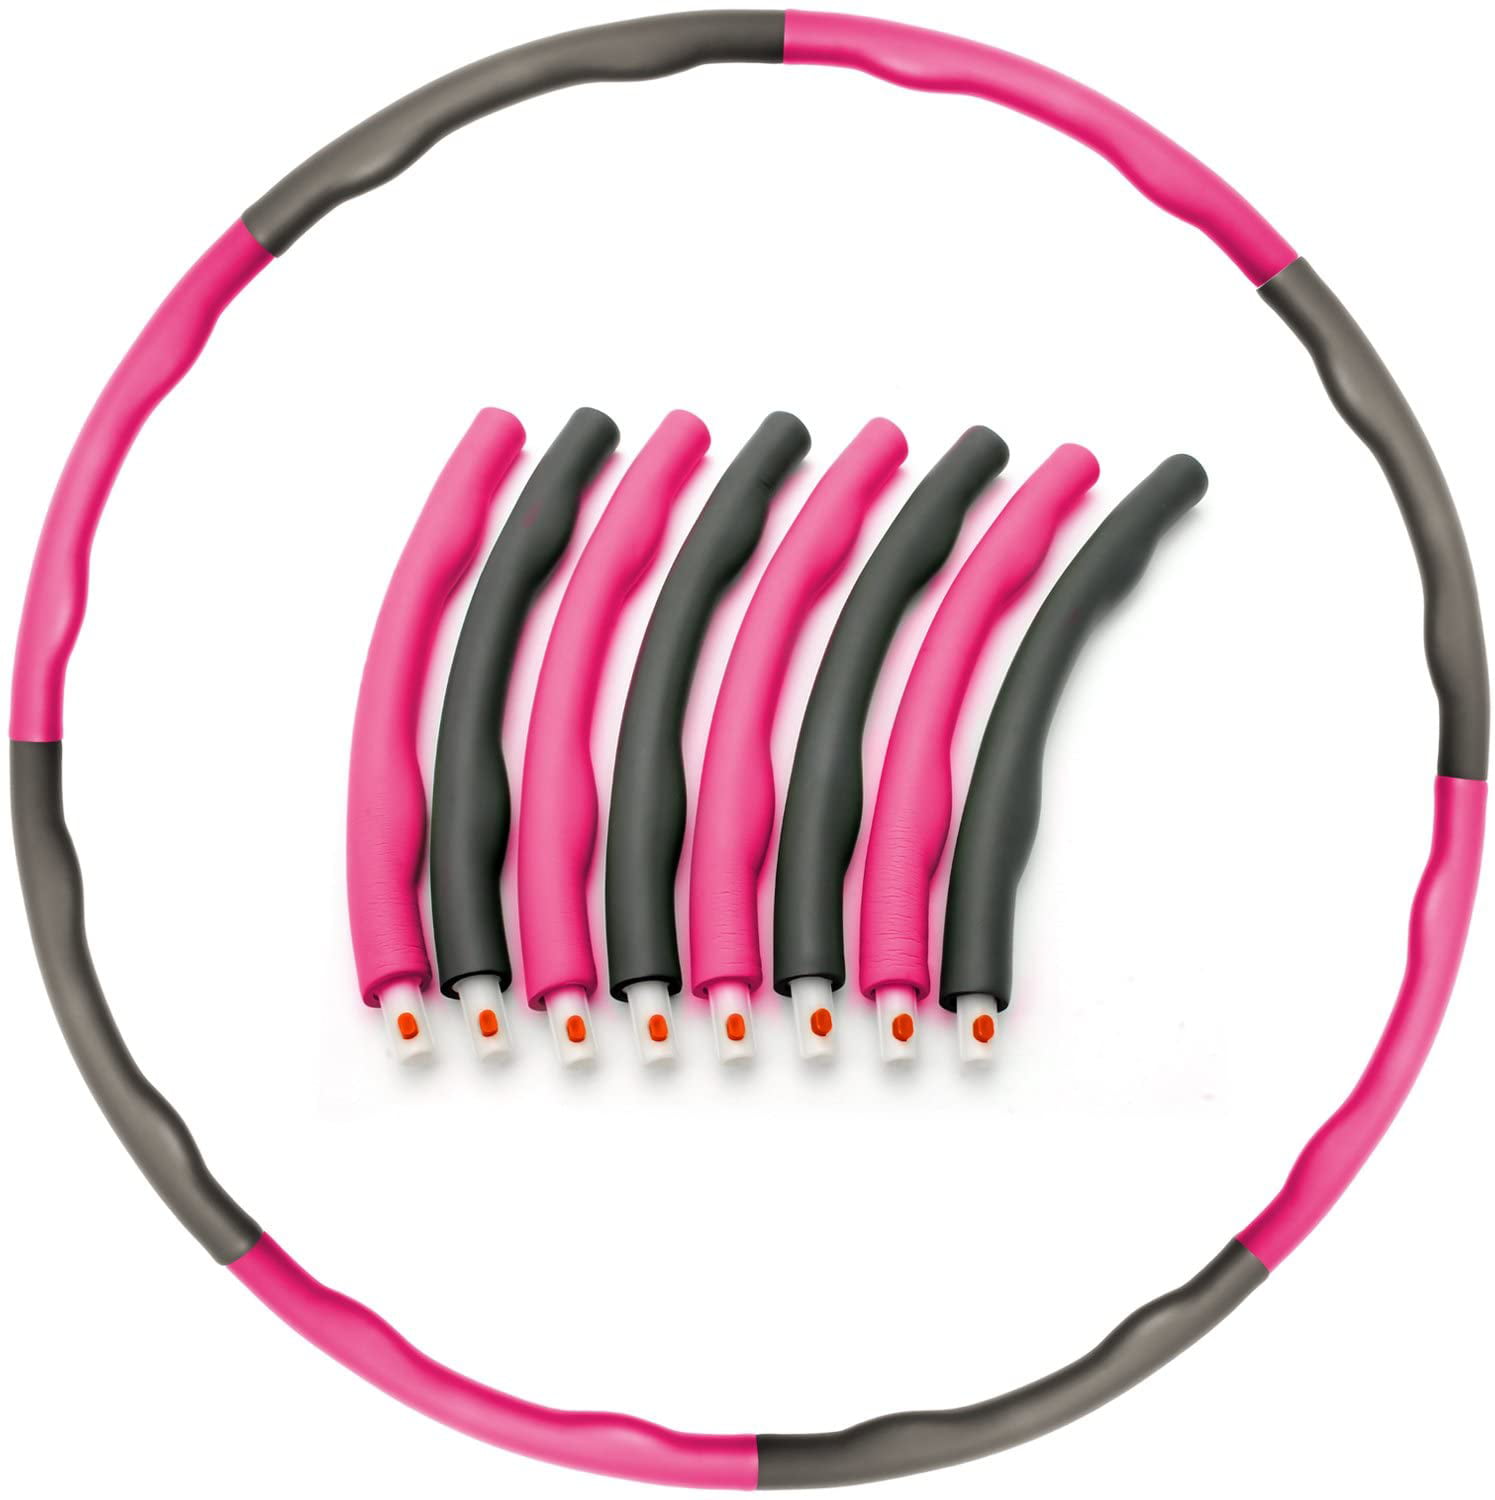 Goyishun Weighted Hoola Hoops for Adults Hoola Hoop for Exercise 8-Section Detachable Professional Wavy Design Soft Hoola Hoop for Women Pink-Gray 